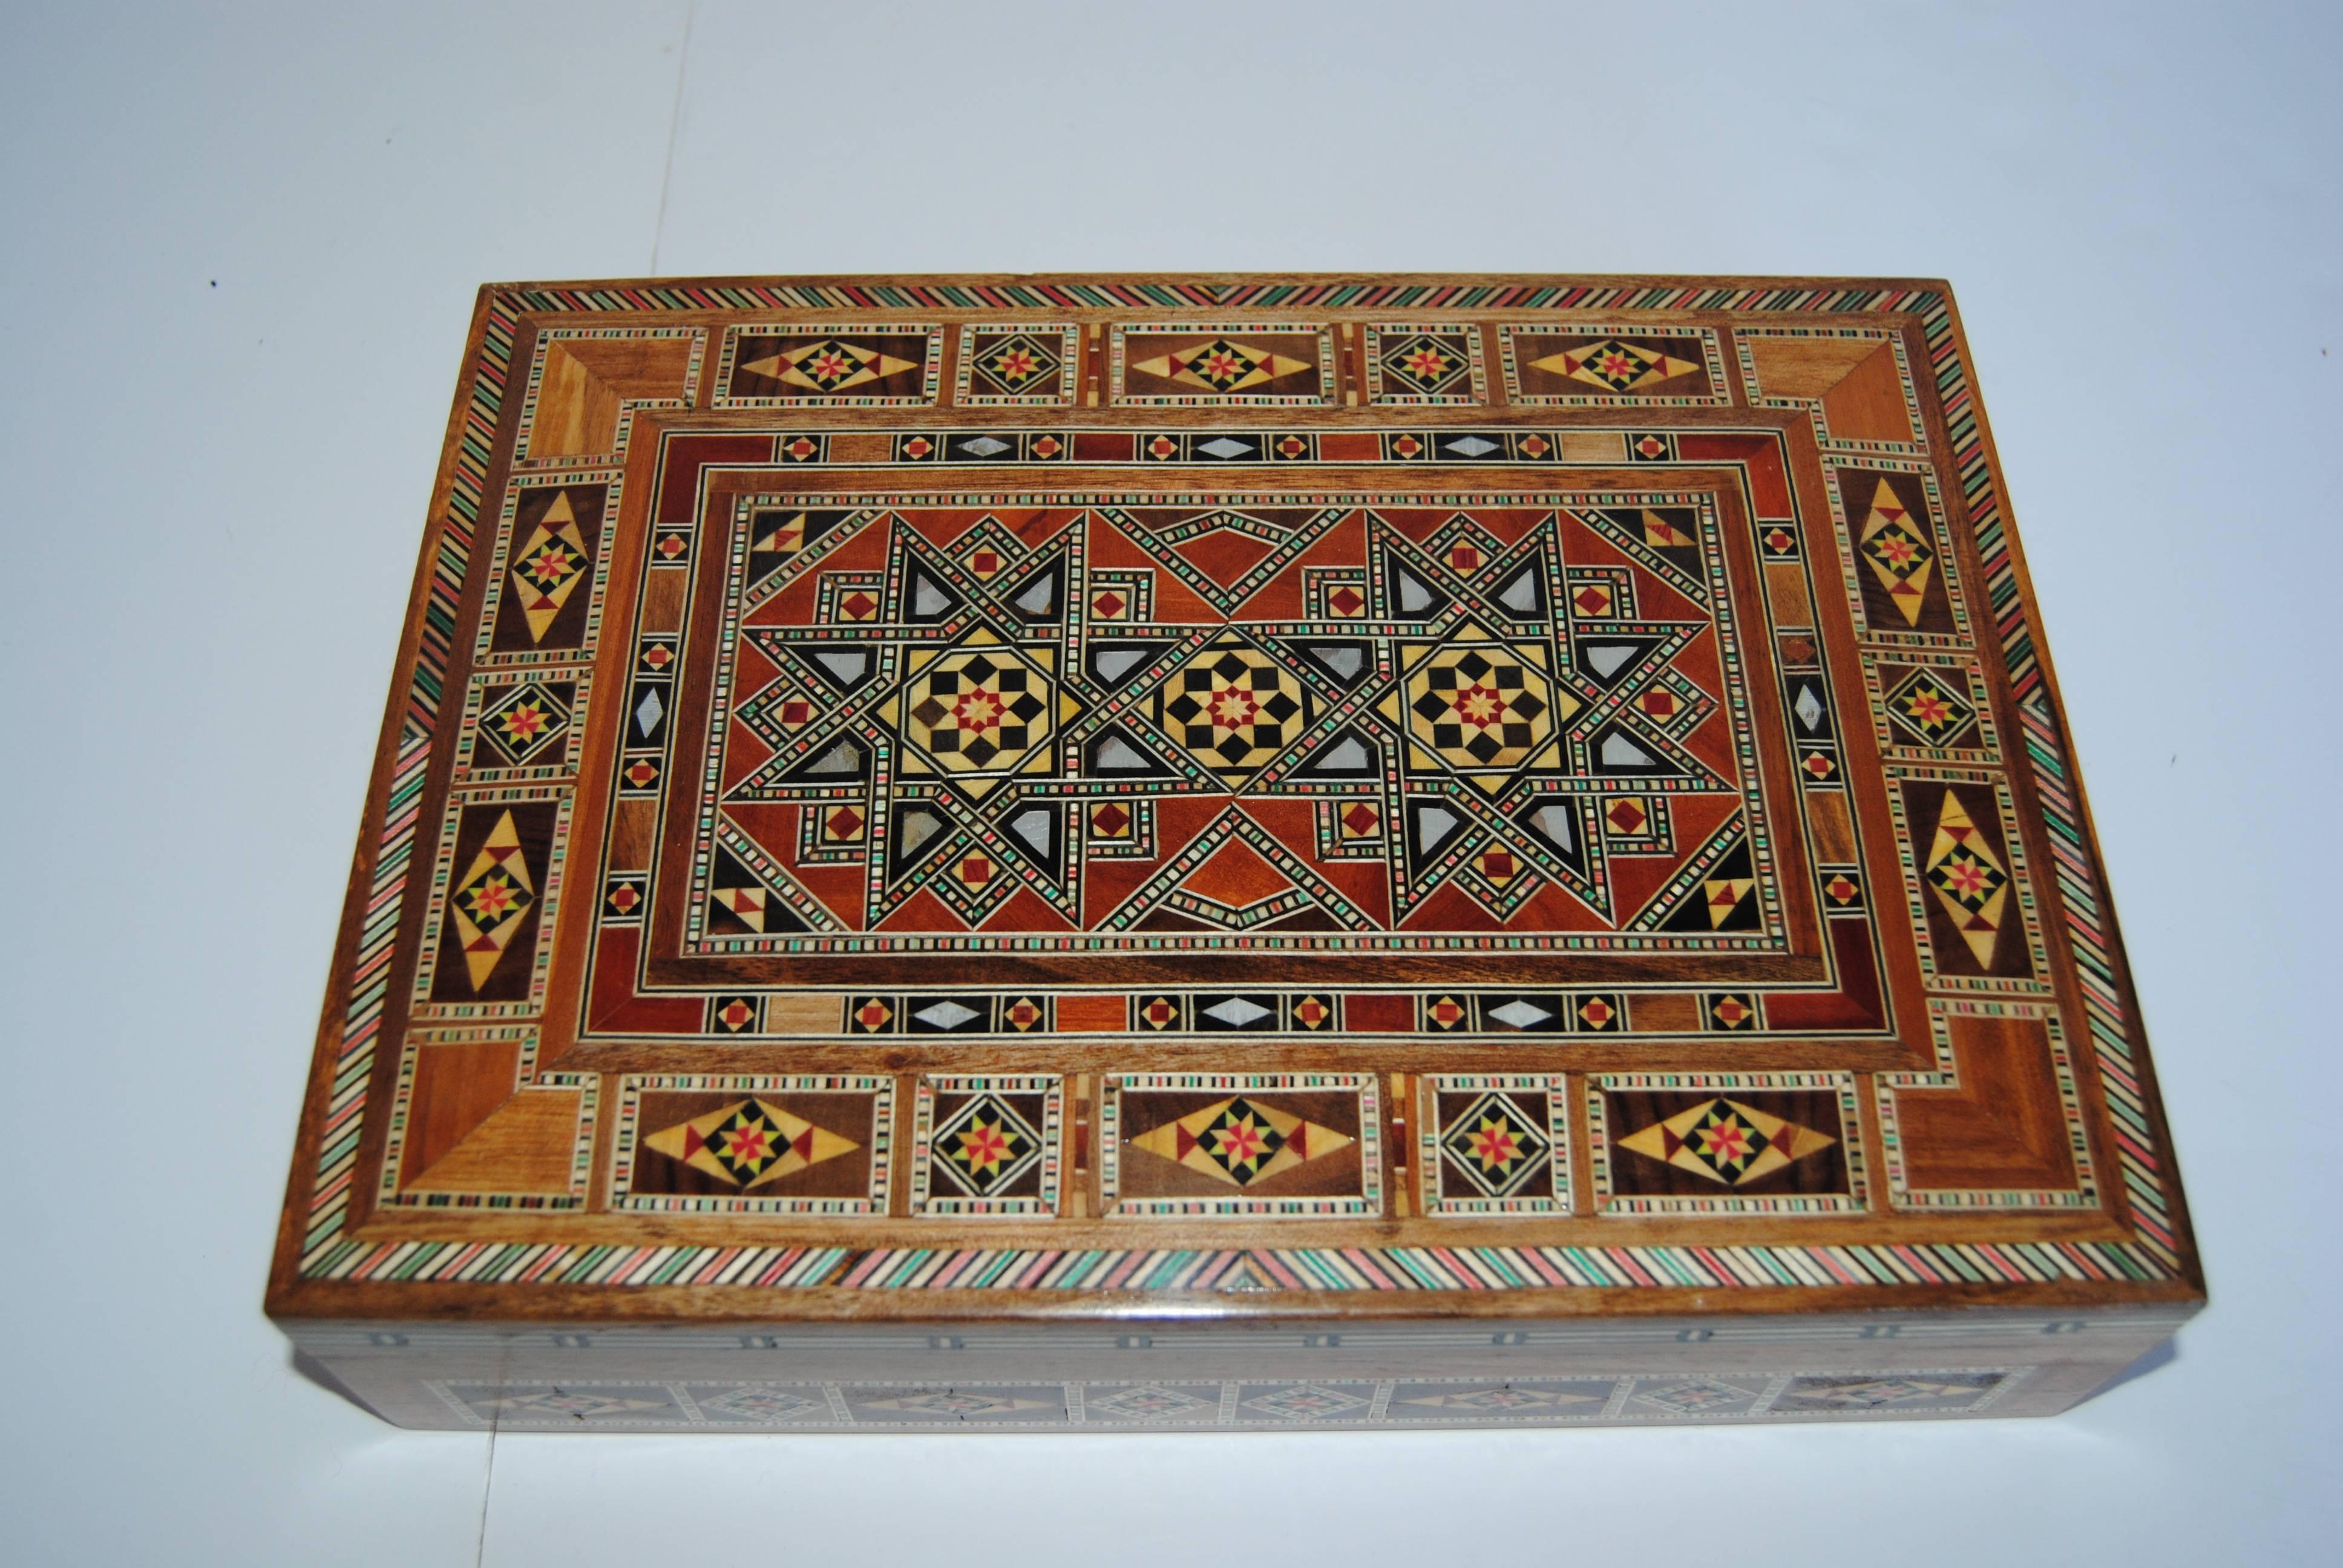 Syrian walnut wood box with different fruitwoods and mother-of-pearl. The top has a raised beveled edge with intricate inlay. It is lined with a wine velvet with four divided areas. Handmade by skilled Syrian artists in the late 20th century new